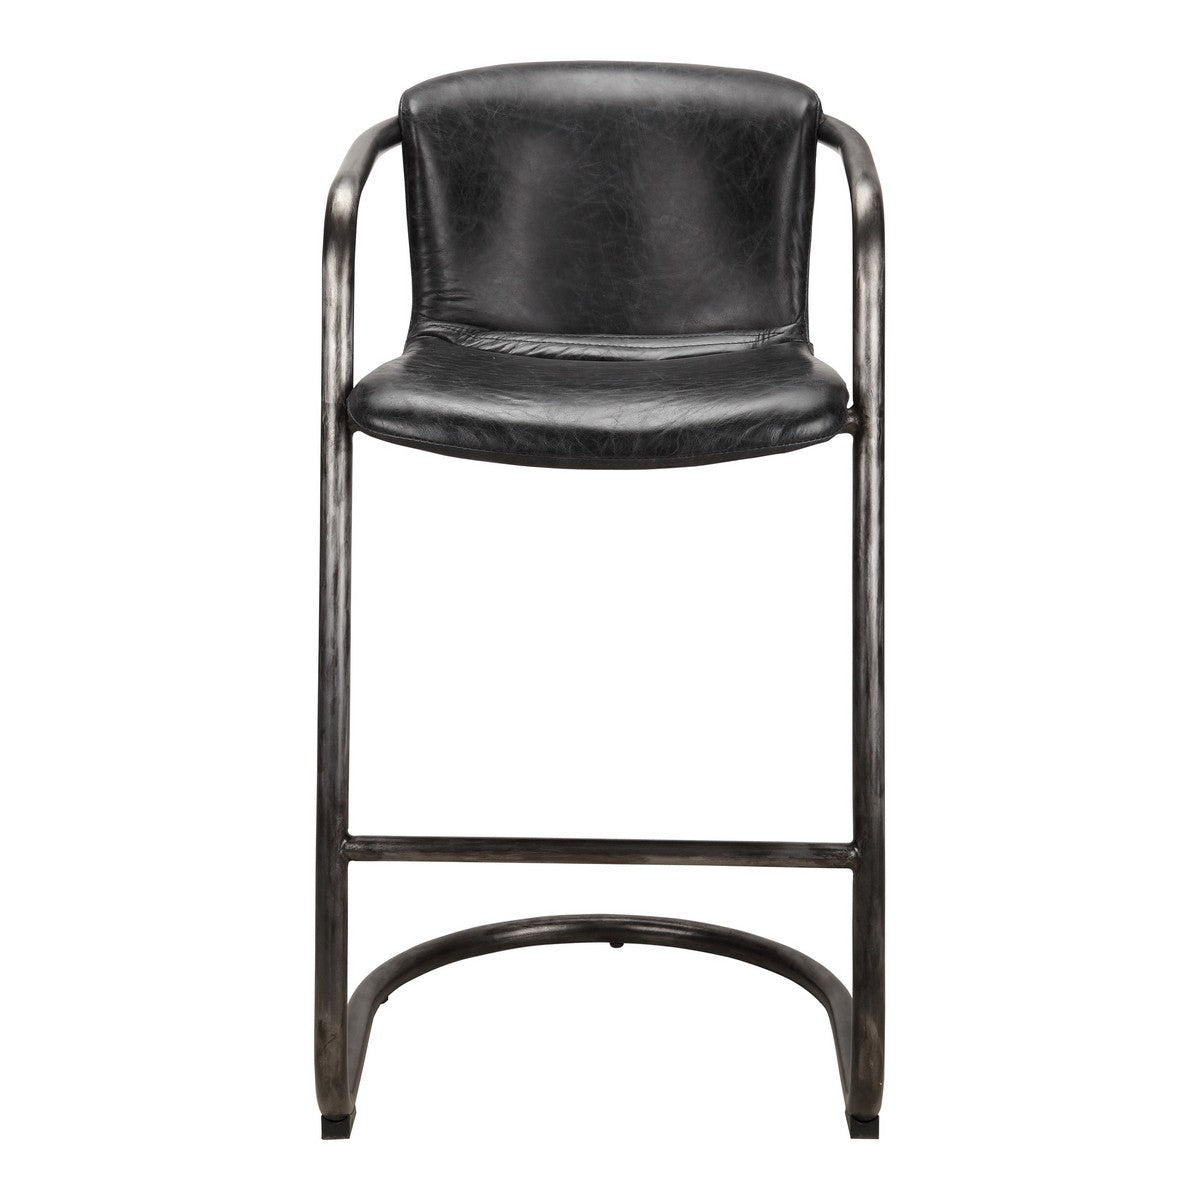 Moe's Home Collection Freeman Barstool Antique Black-Set of Two - PK-1060-02 - Moe's Home Collection - Bar Stools - Minimal And Modern - 1